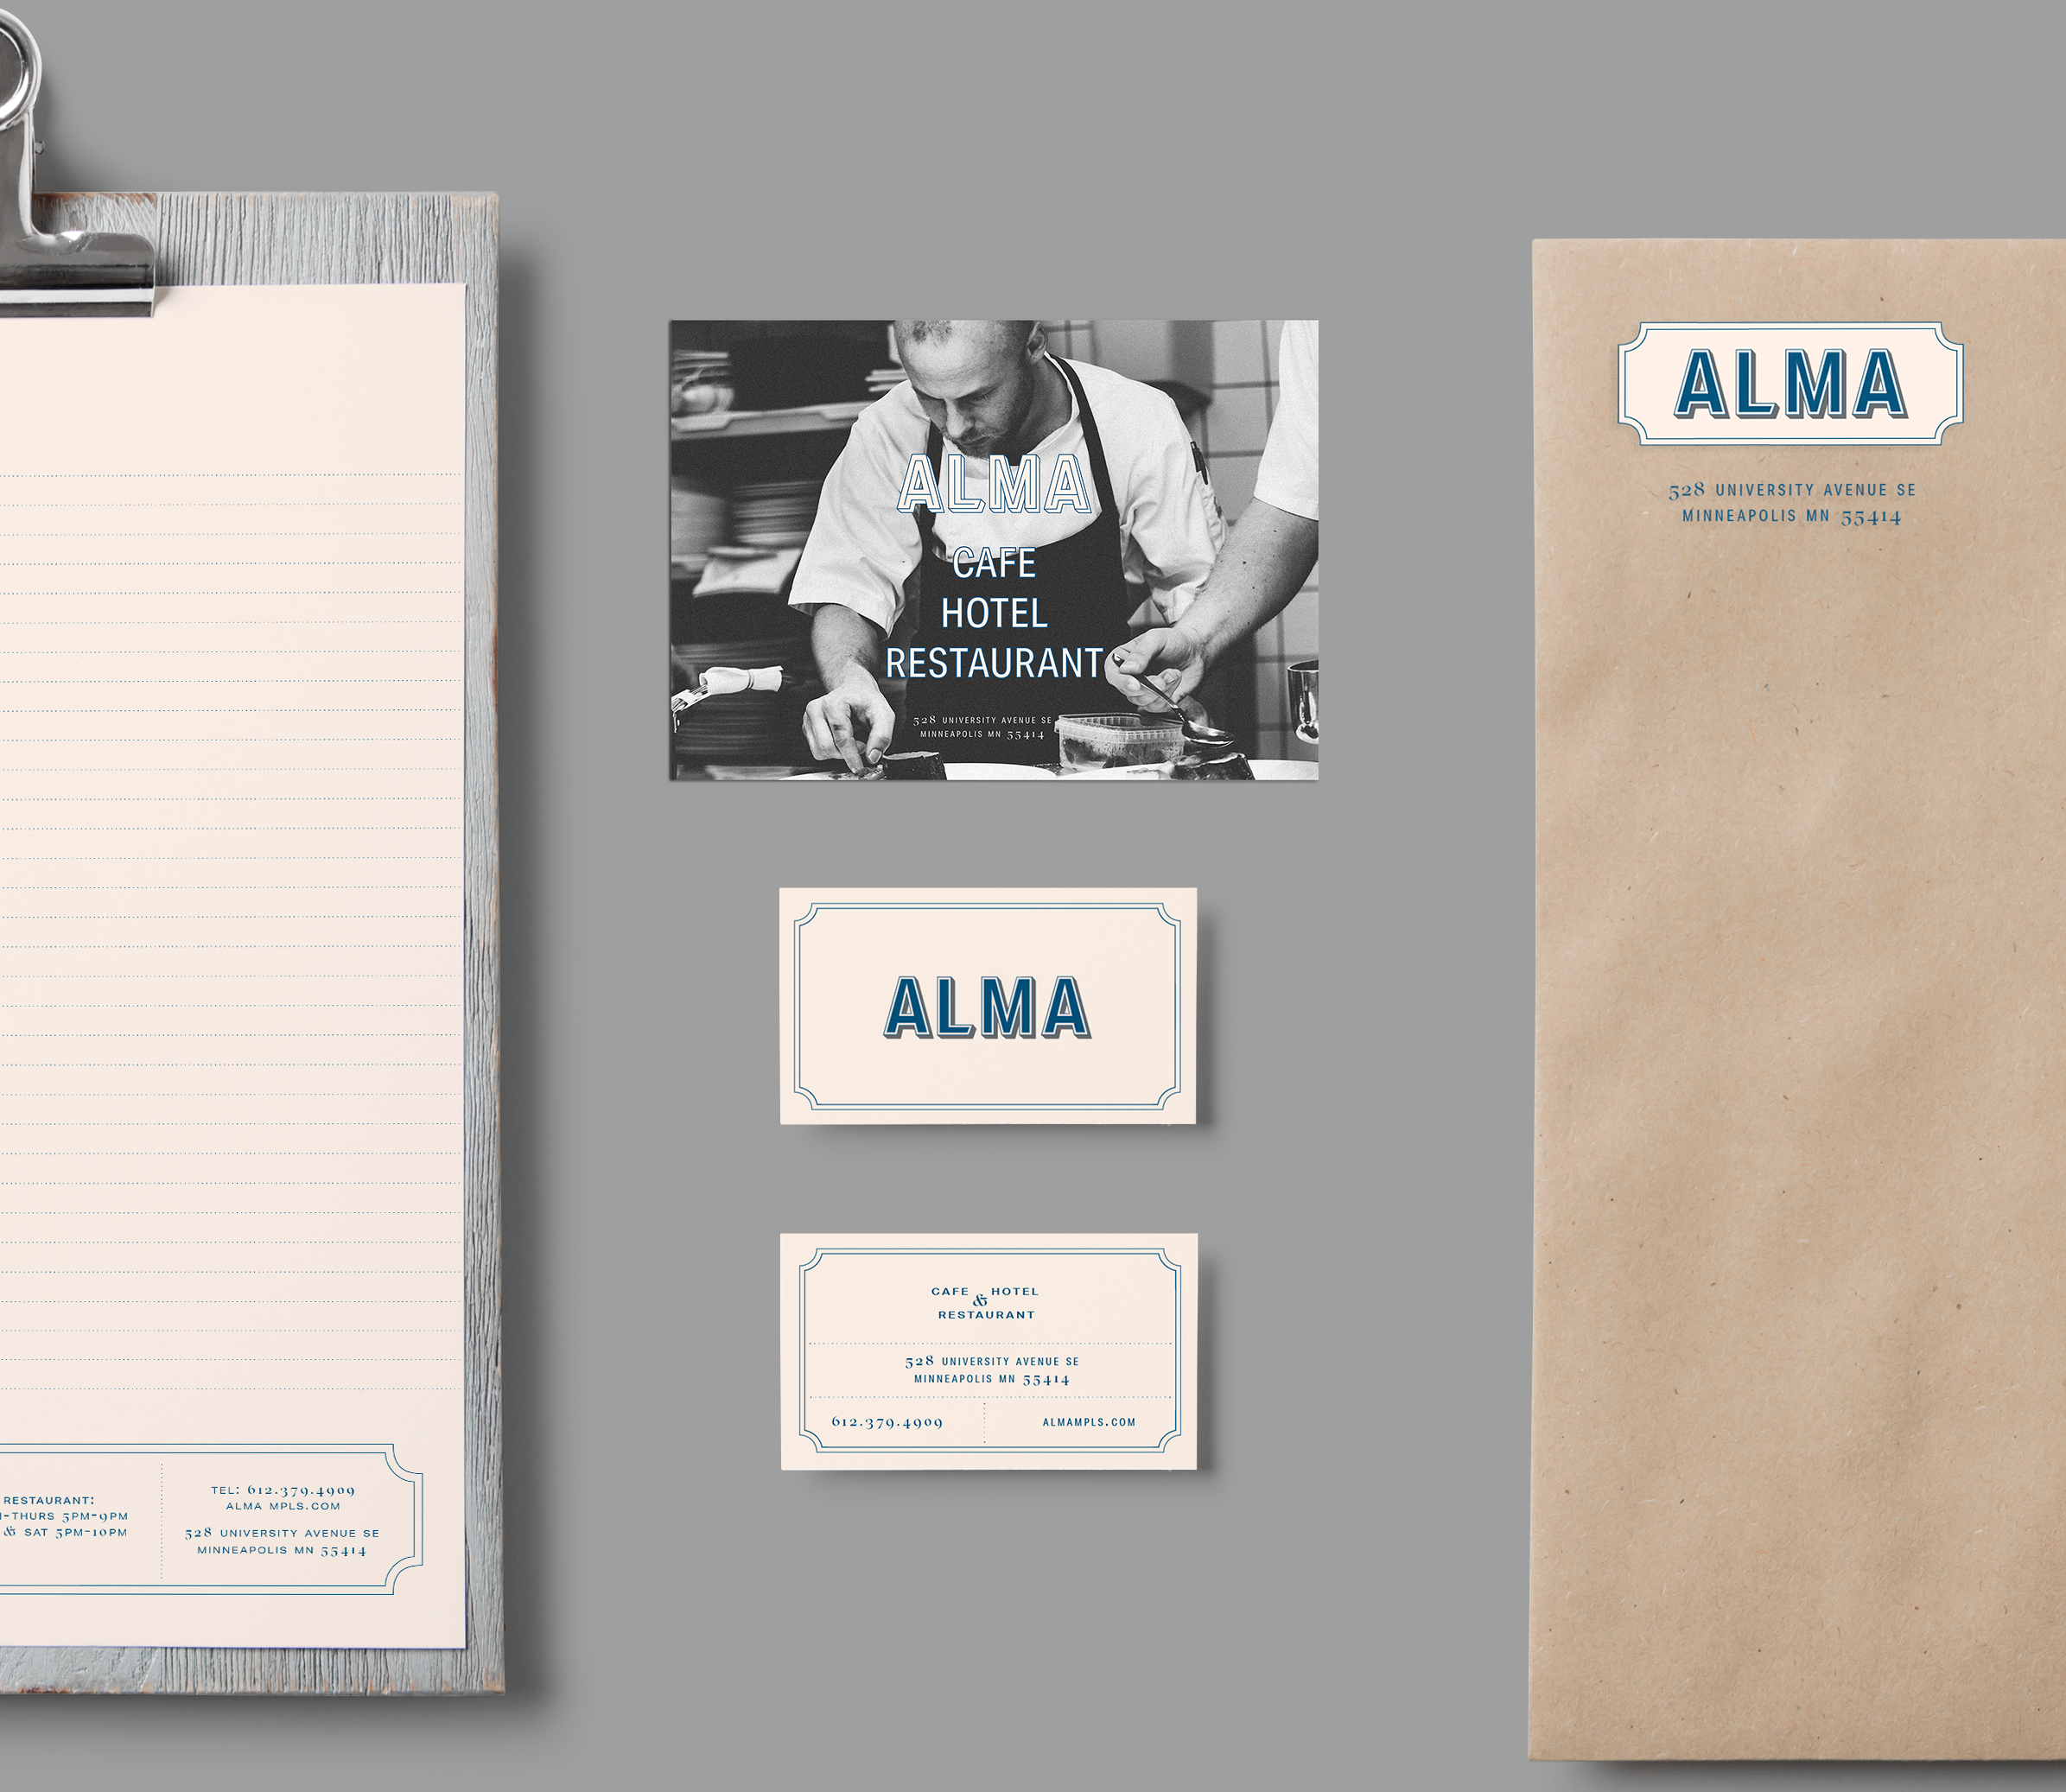 Alma_Stationary_crop.png